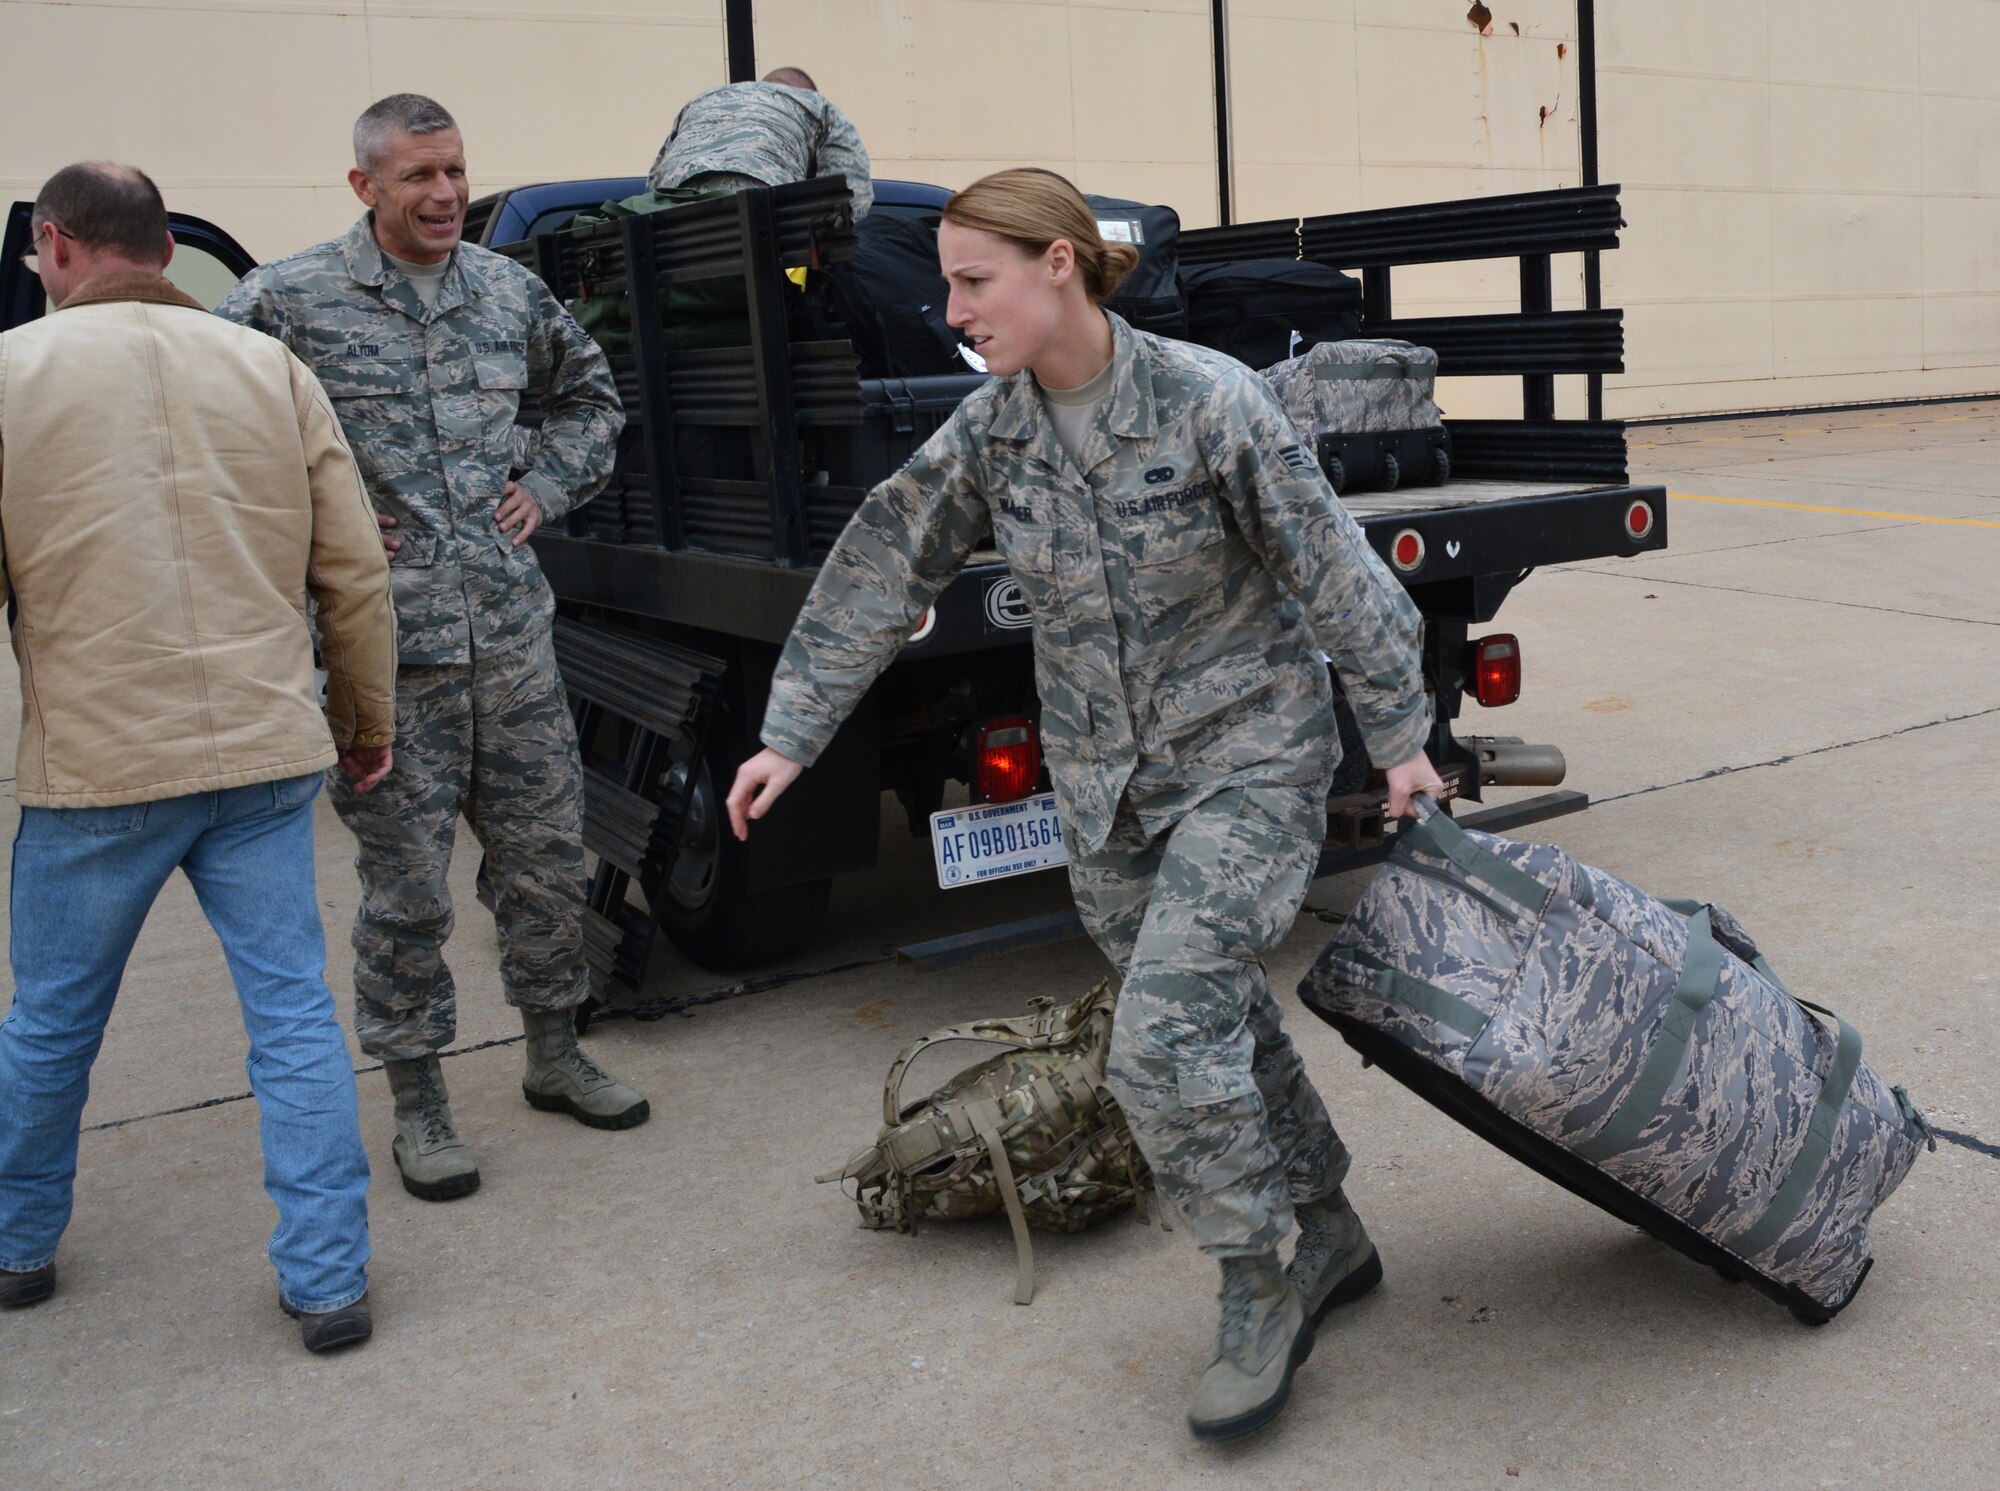 Senior Airman Jenifer Wagoner, 507th Maintenance Group loads her bag into a truck Dec 12, 2016 at Tinker Air Force Base, Oklahoma prior to deploying to Incirlik Air Base, Turkey.  Wagoner is deployed to support maintenance operations as an analyst. (U.S. Air Force Photo/Tech. Sgt. Lauren Gleason)